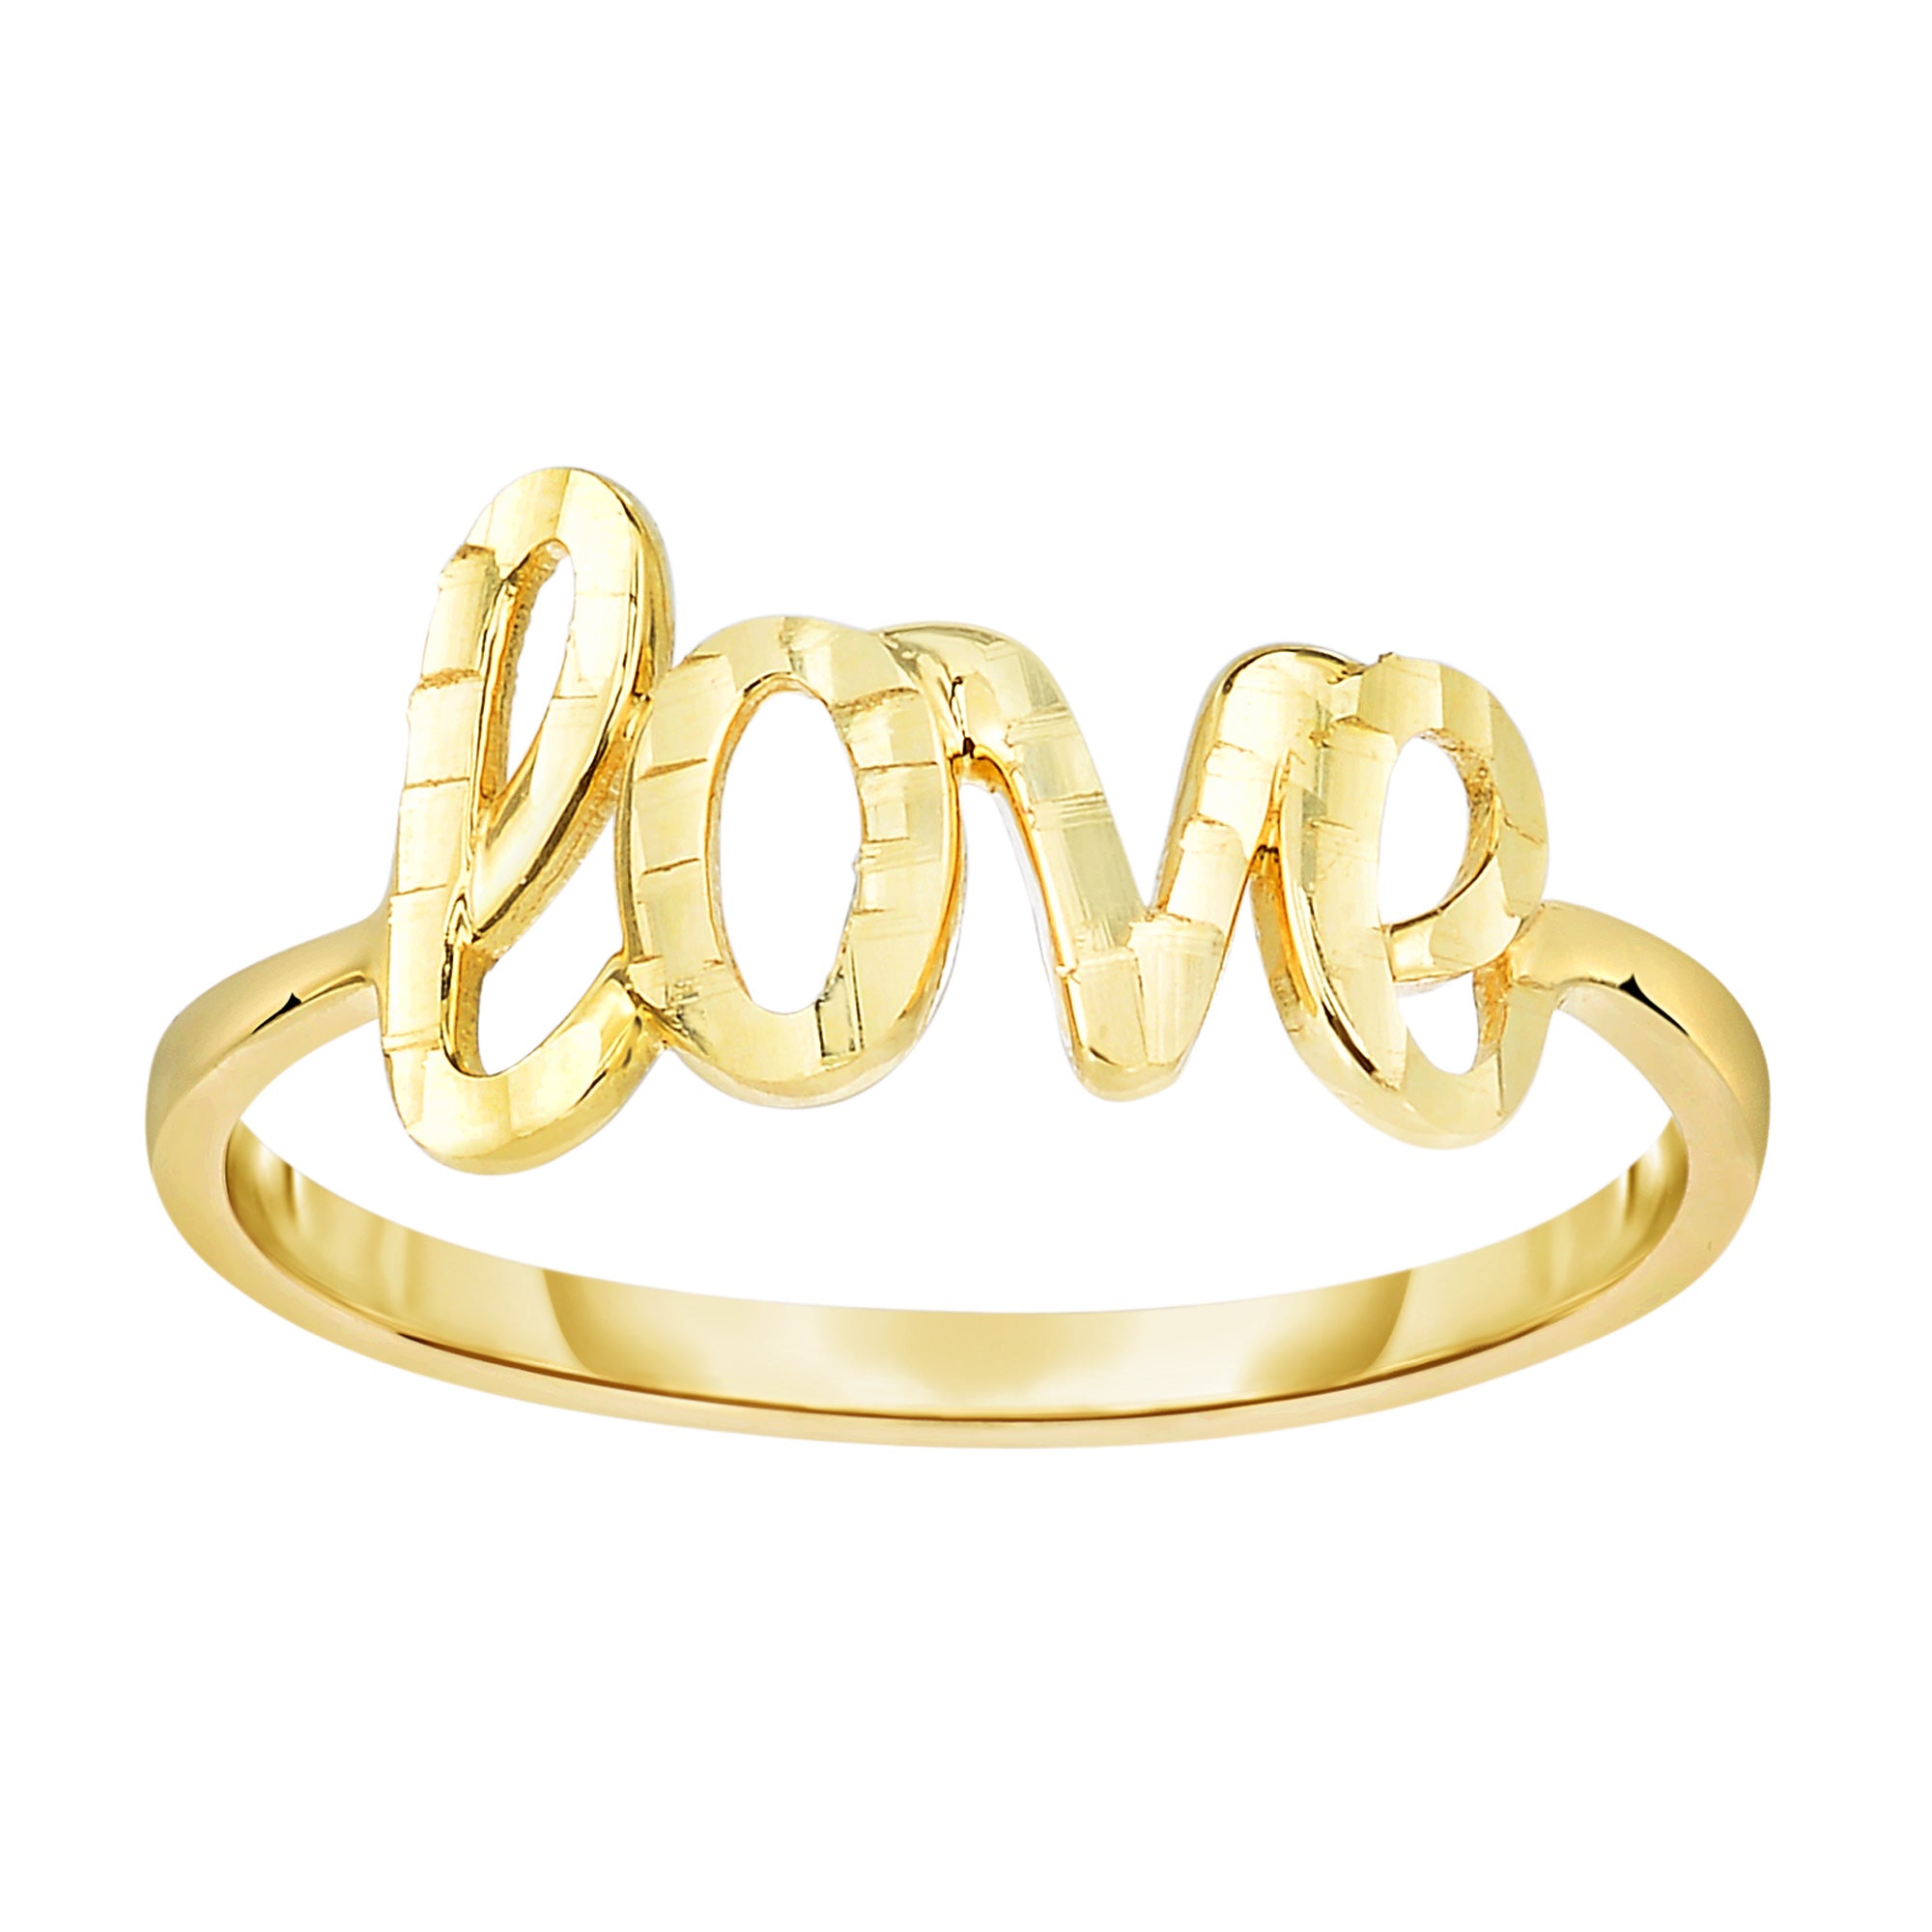 14K Yellow Gold Diamond Cut Love Ring, Size 7 fine designer jewelry for men and women